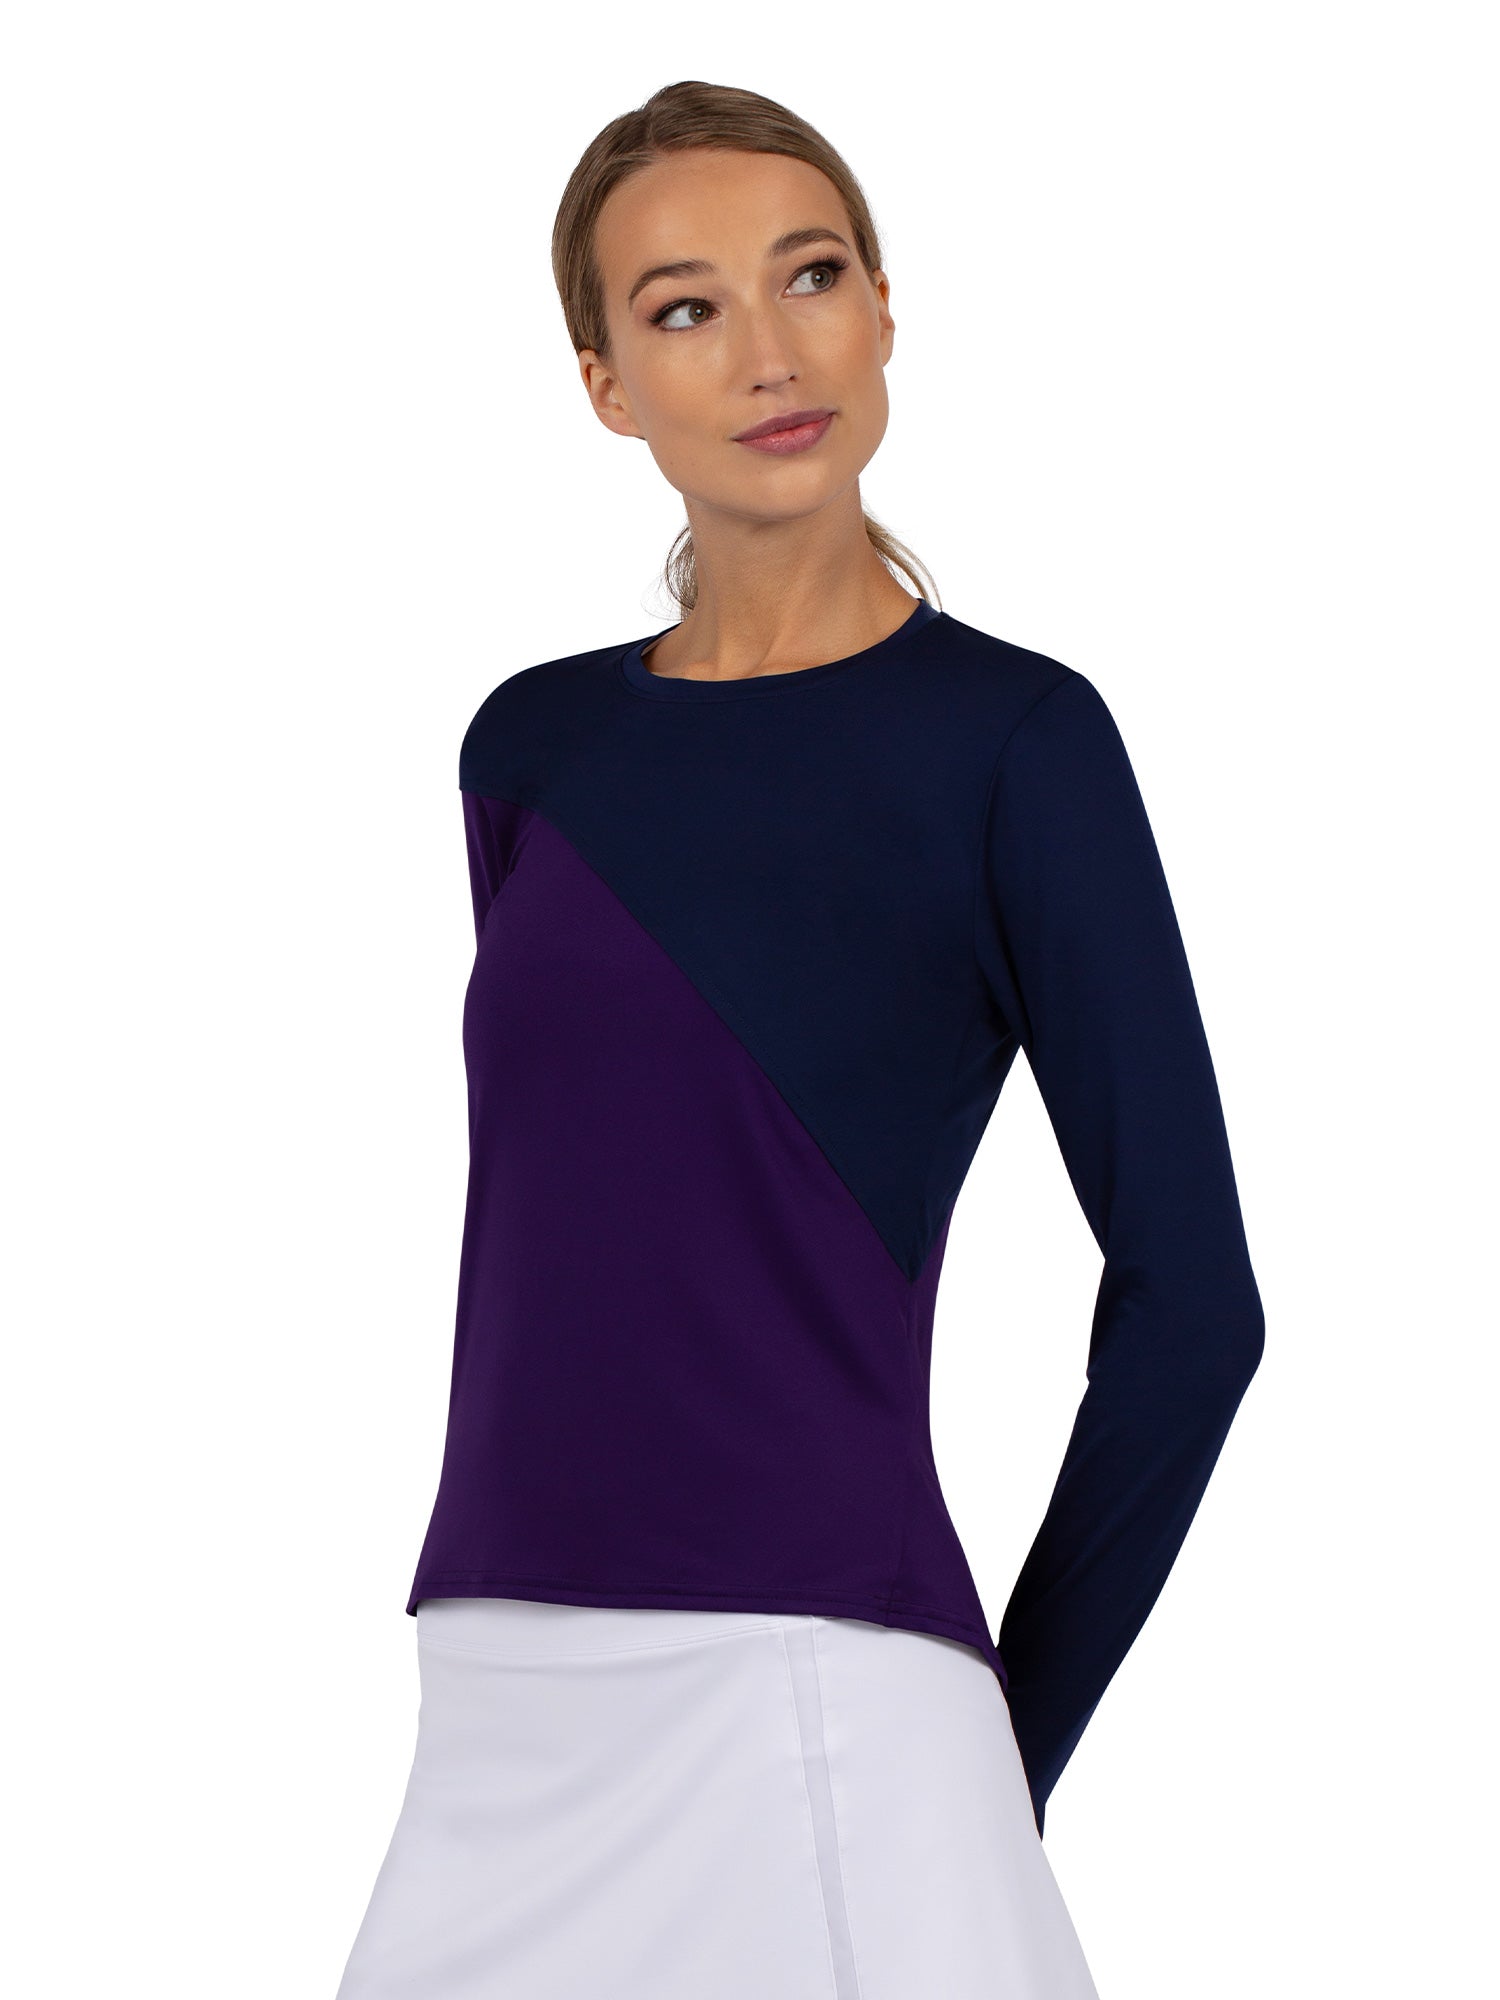 Front view of model wearing the Parker Long Sleeve Crew Neck Top in Imperial and Ink with her hand at her side